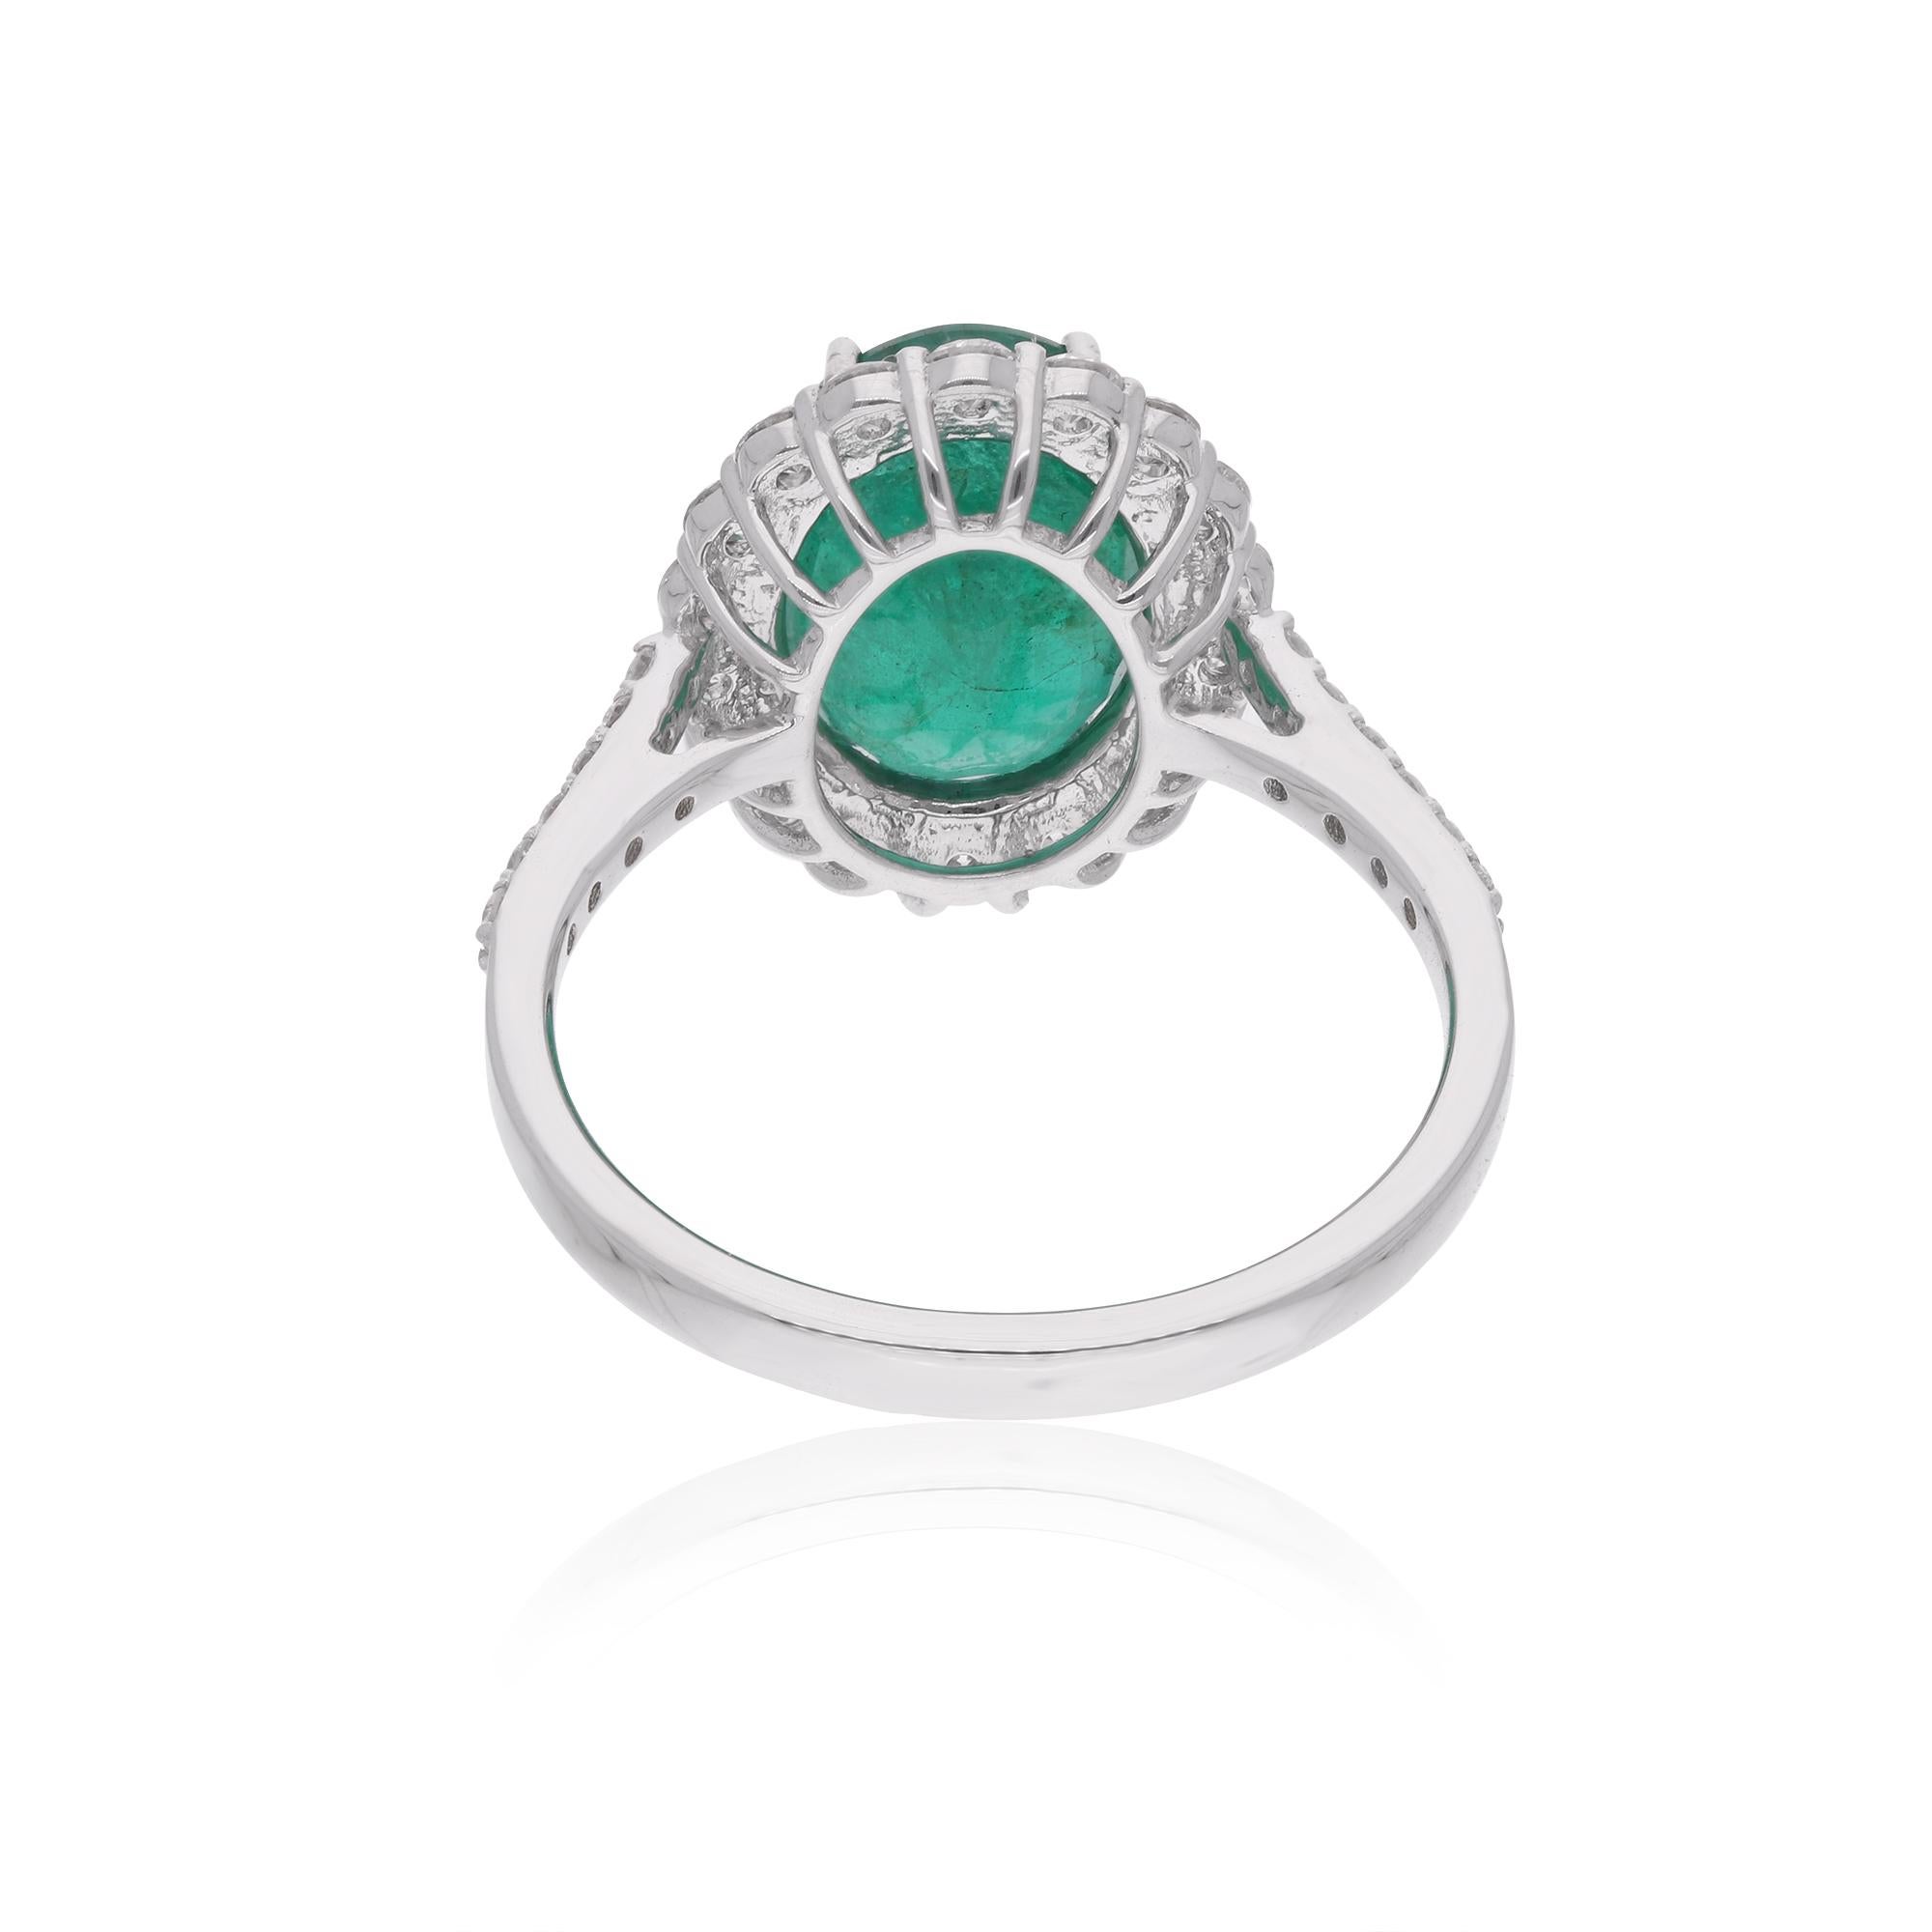 Item Code :- SER-24014
Gross Wt. :- 3.98 gm
18k Solid White Gold Wt. :- 3.12 gm
Natural Diamond Wt. :- 0.68 Ct. ( AVERAGE DIAMOND CLARITY SI1-SI2 & COLOR H-I )
Emerald Wt. :- 3.64 Ct.
Ring Size :- 7 US & All size available

✦